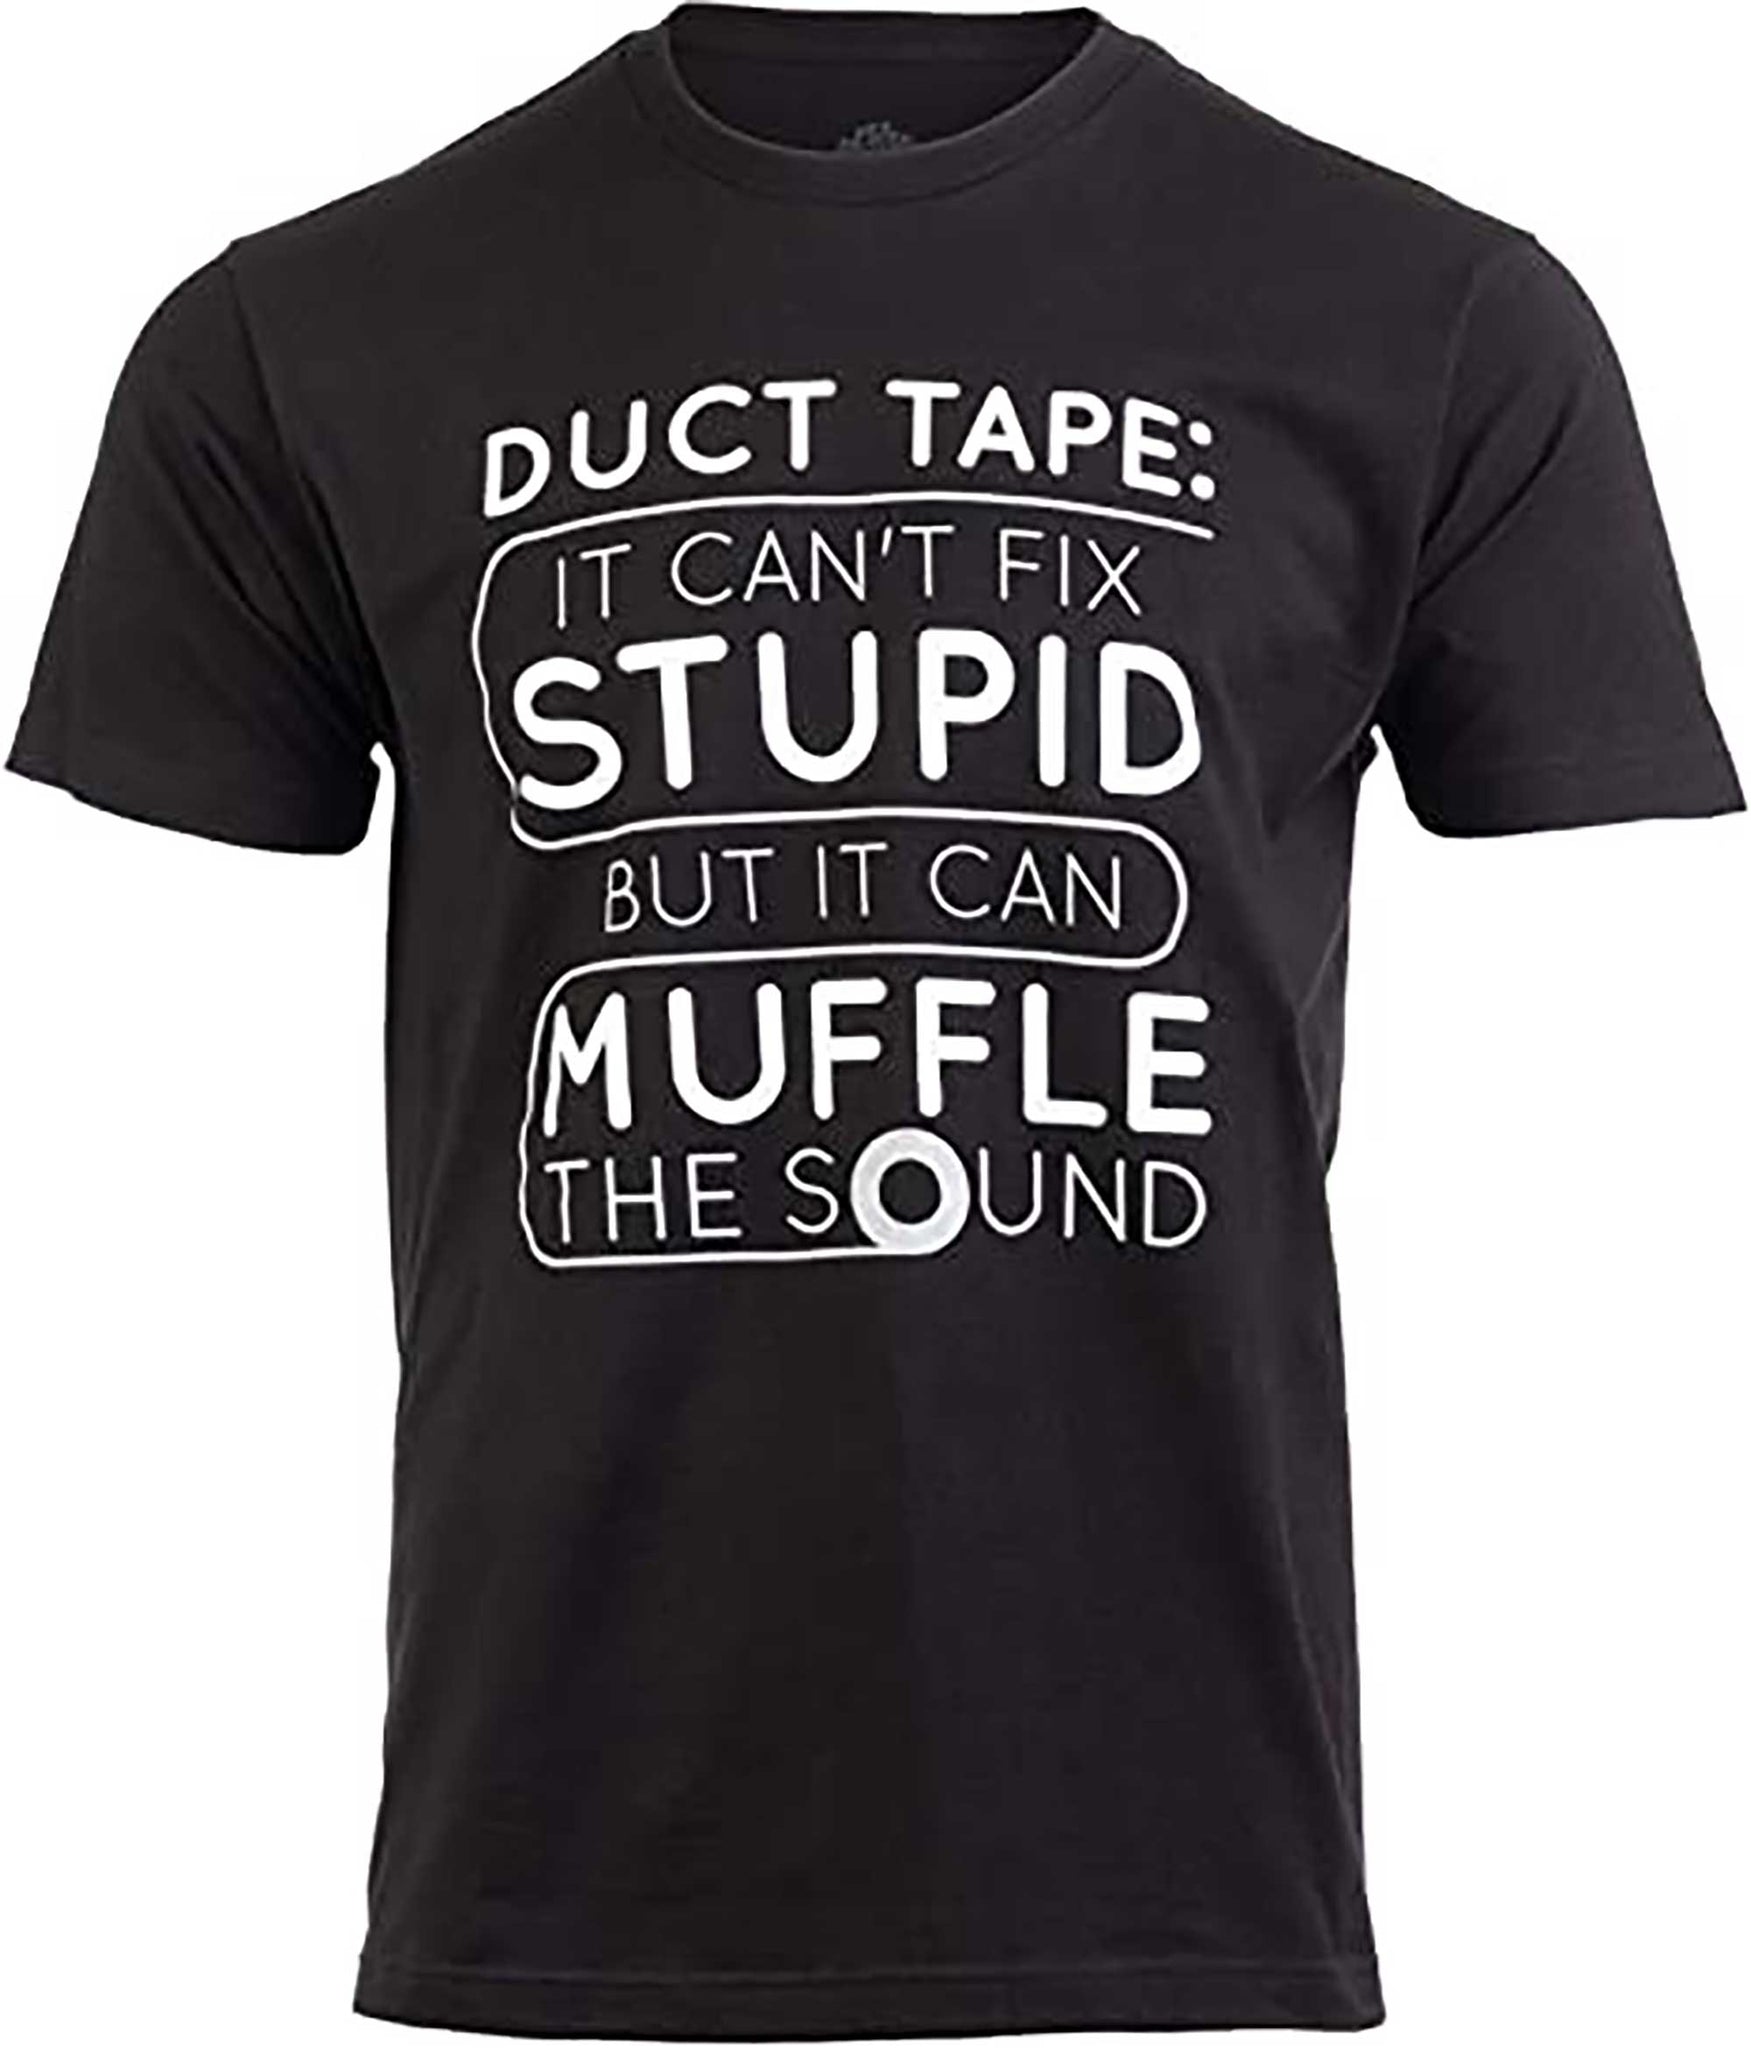 Skitongift Duct Tape Cant Fix Stupid, but can Muffle The Sound Funny Men Sarcasm T Shirt